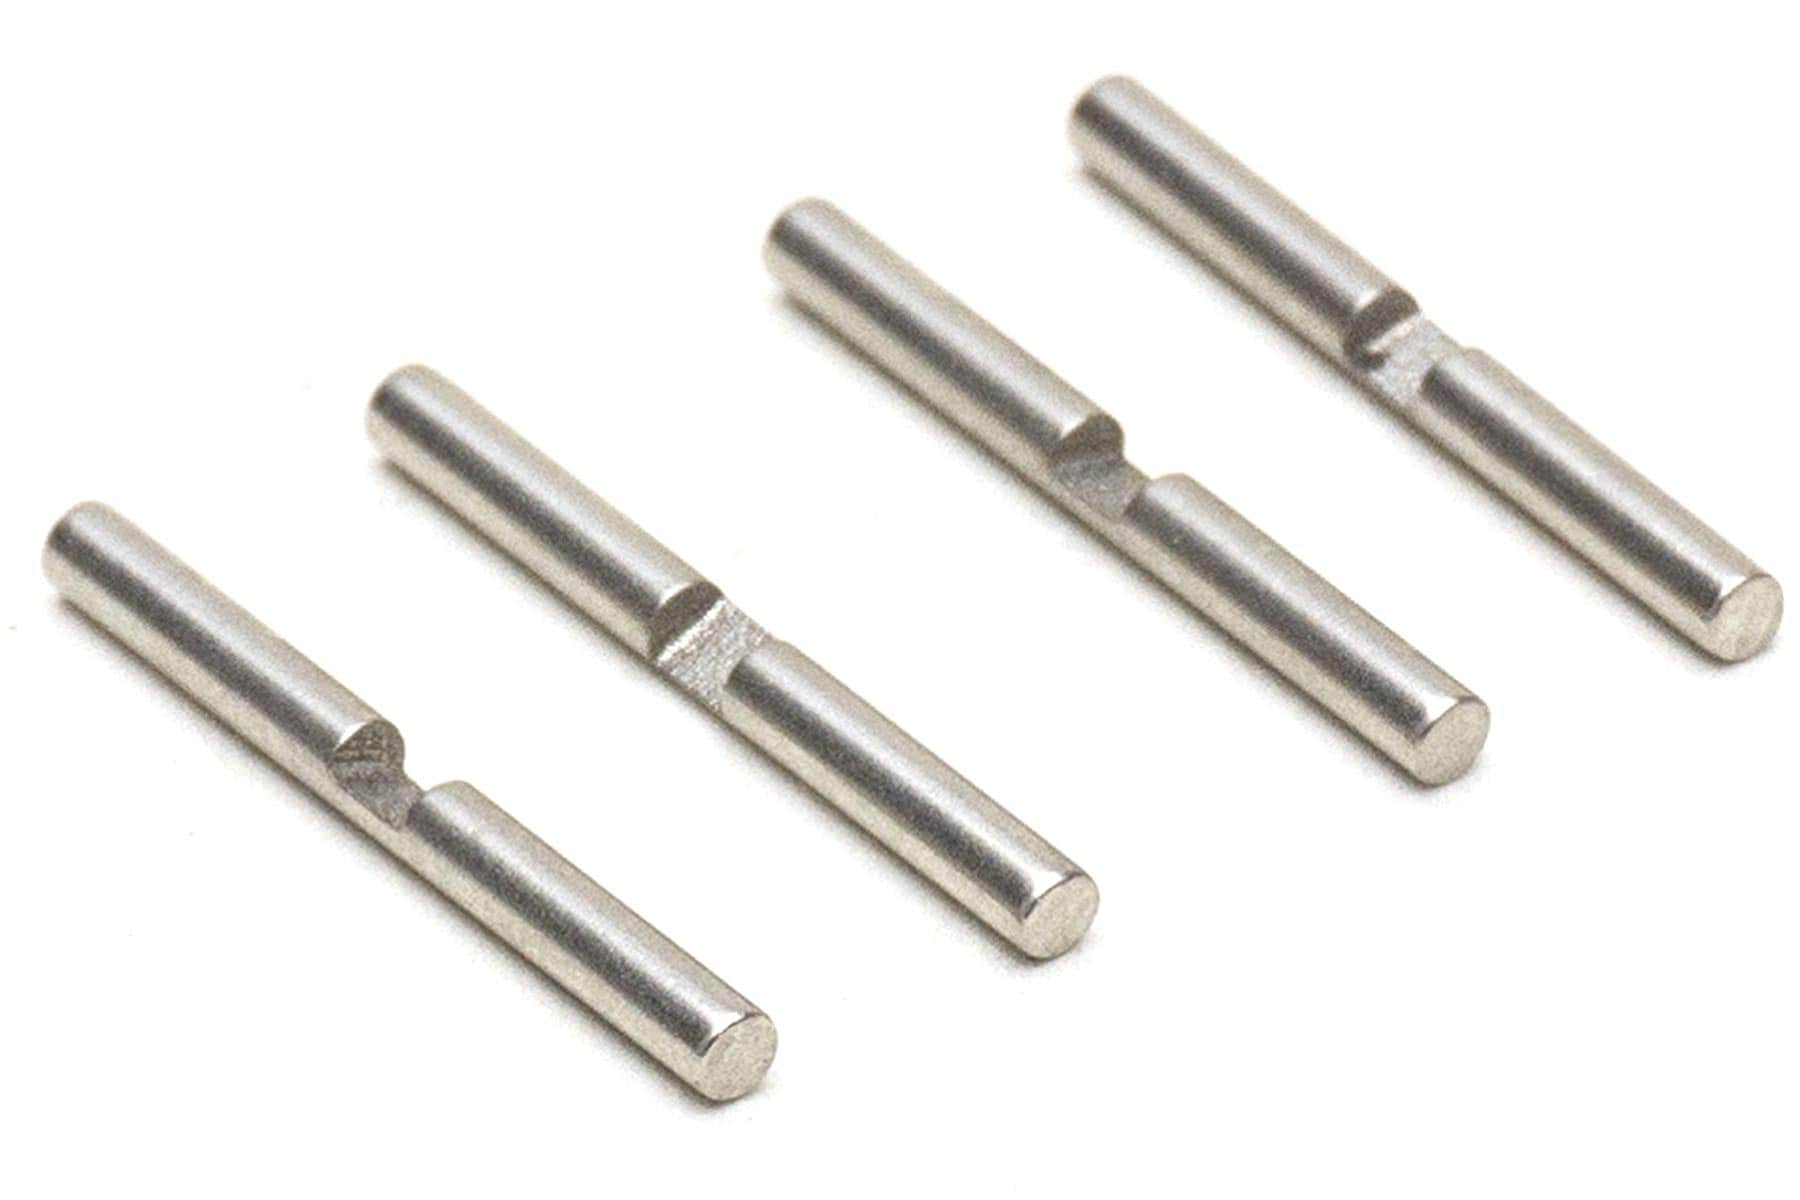 XK 1/18 Scale High Speed Truck 1.5x15.8mm Differential Pin (4 pcs) WLT-A949-51